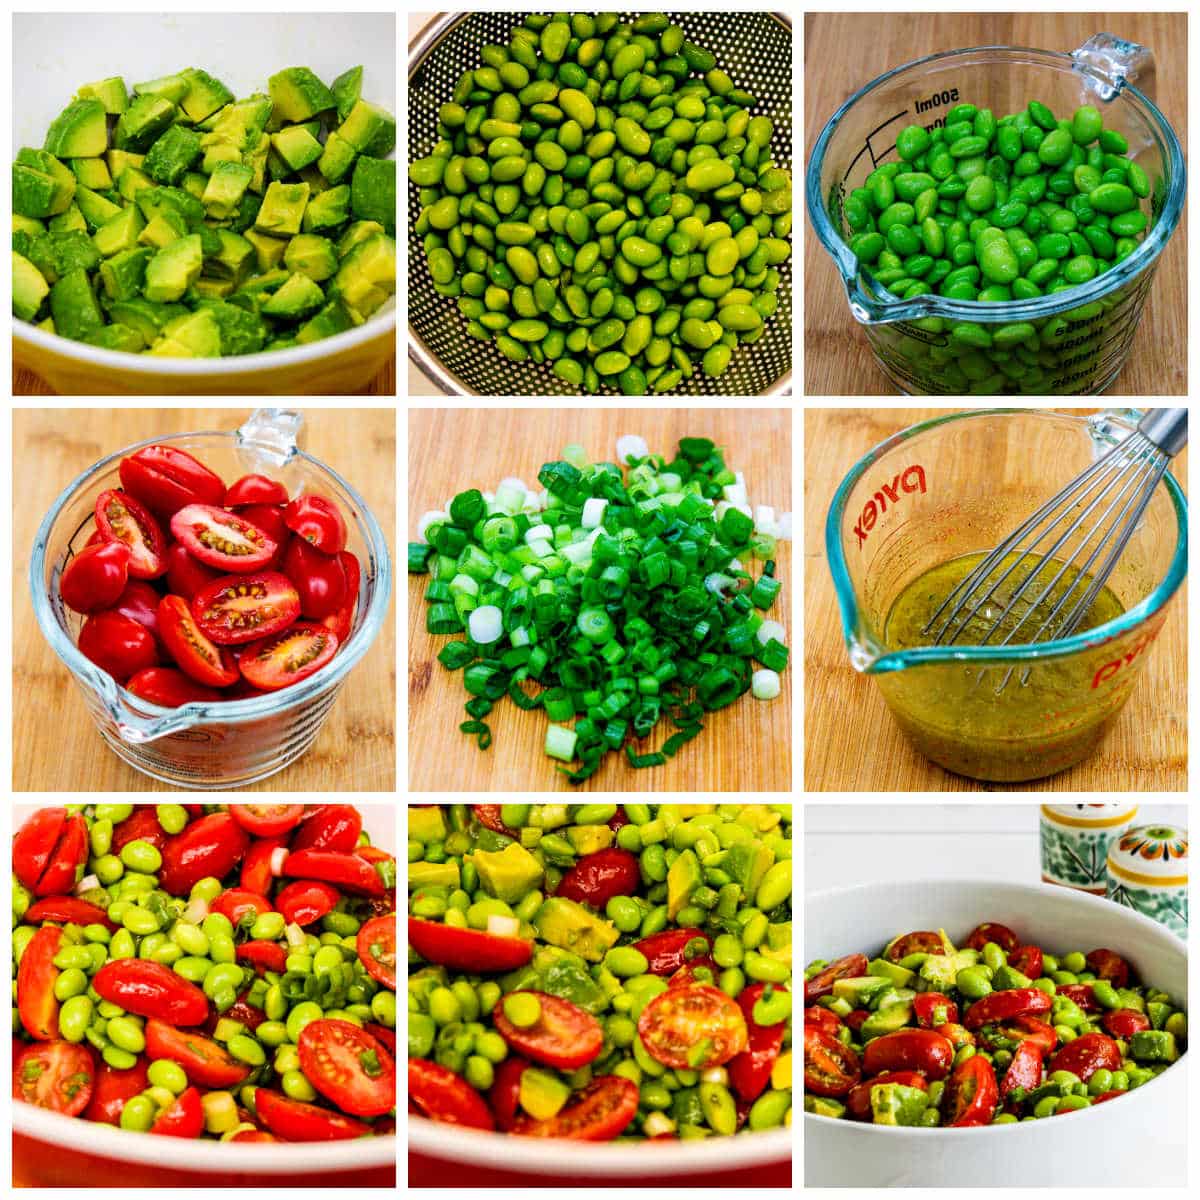 Hands-on collage of tomato and avocado salad with edamame.